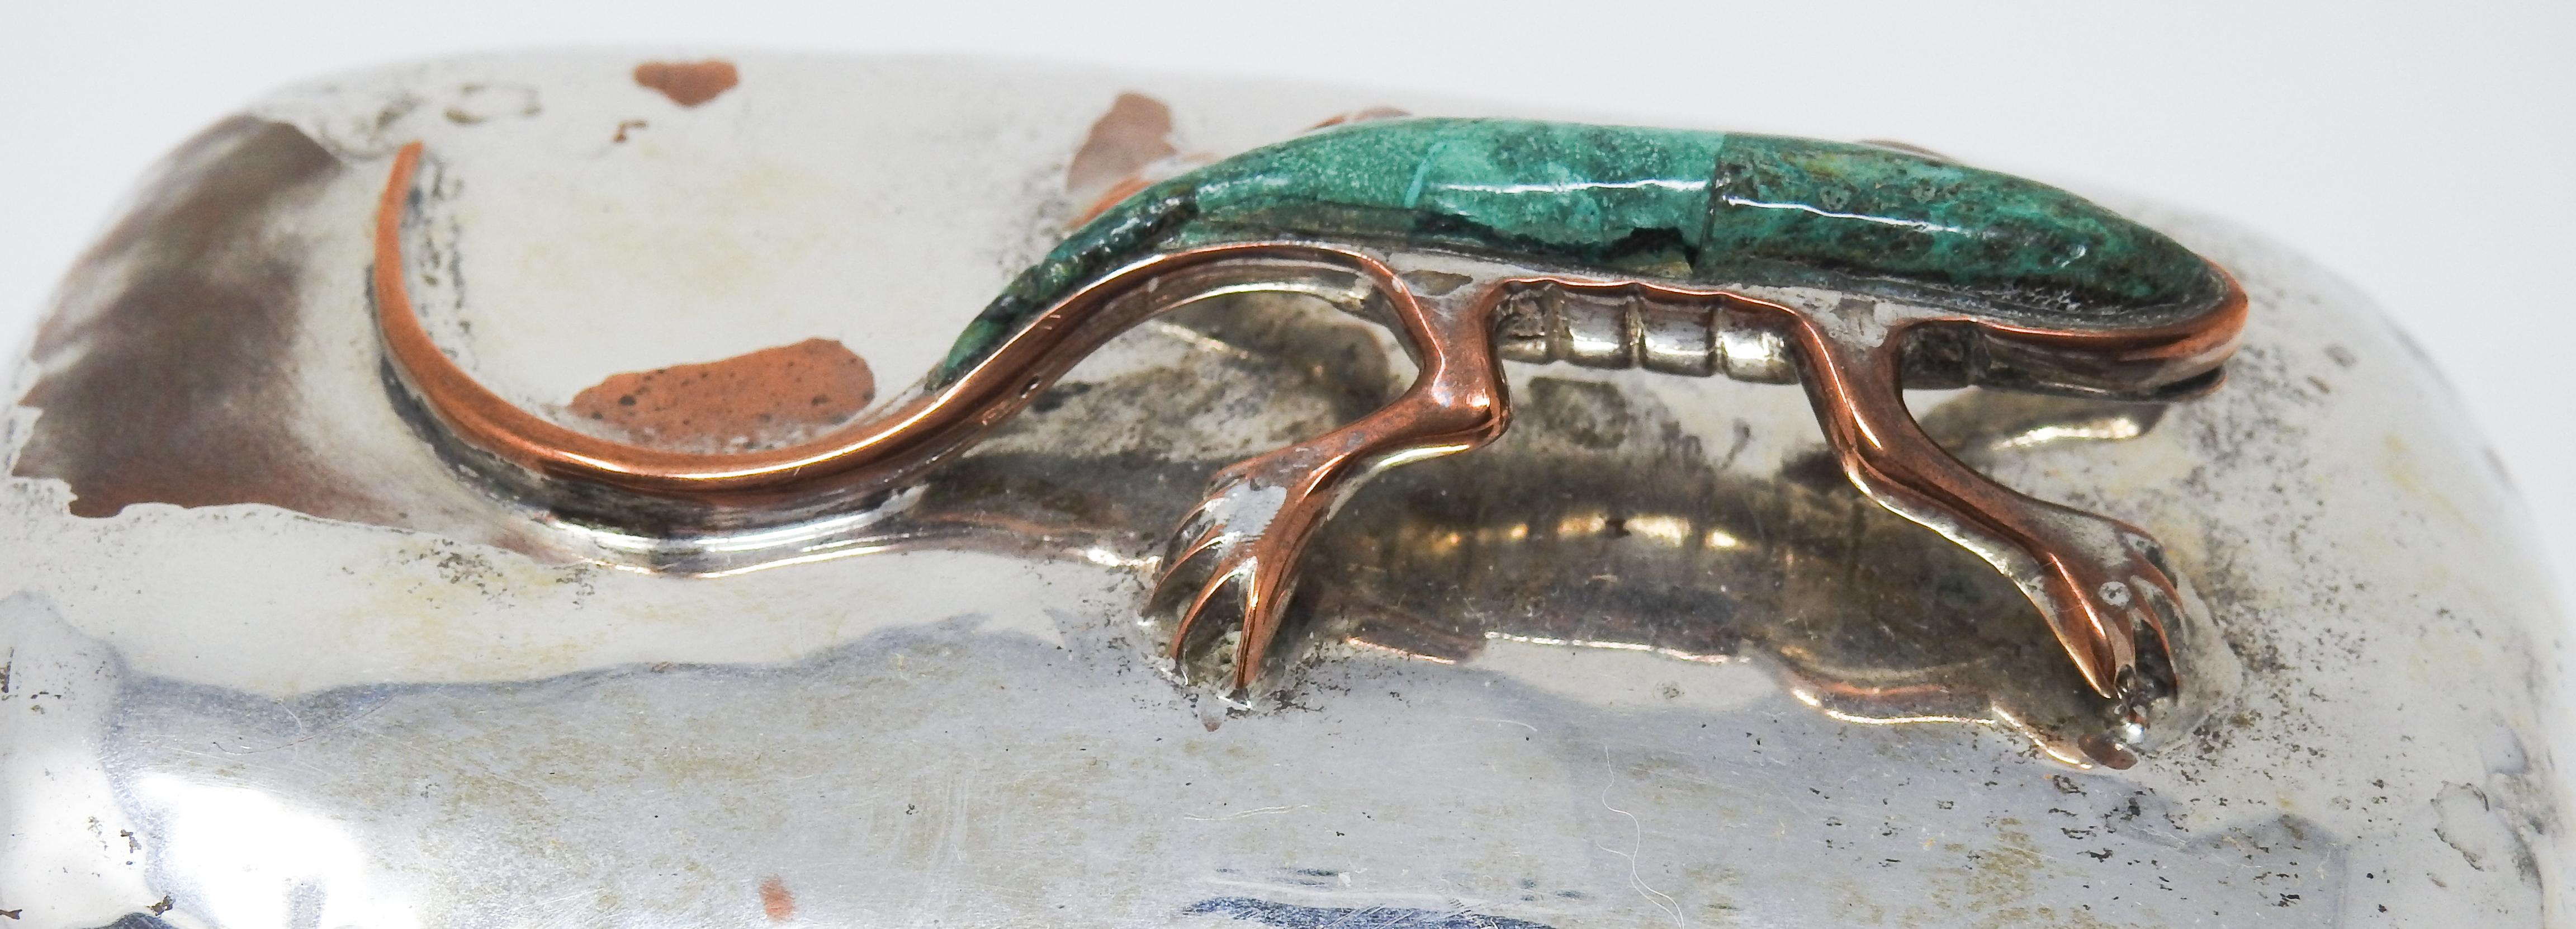 Offering this unique and gorgeous sterling plated lidded dish with a turquoise lizard sculpture on top. You can tell that the dish is handcrafted and hammered copper, and the sterling has been plated on top of the copper. It gives the dish and